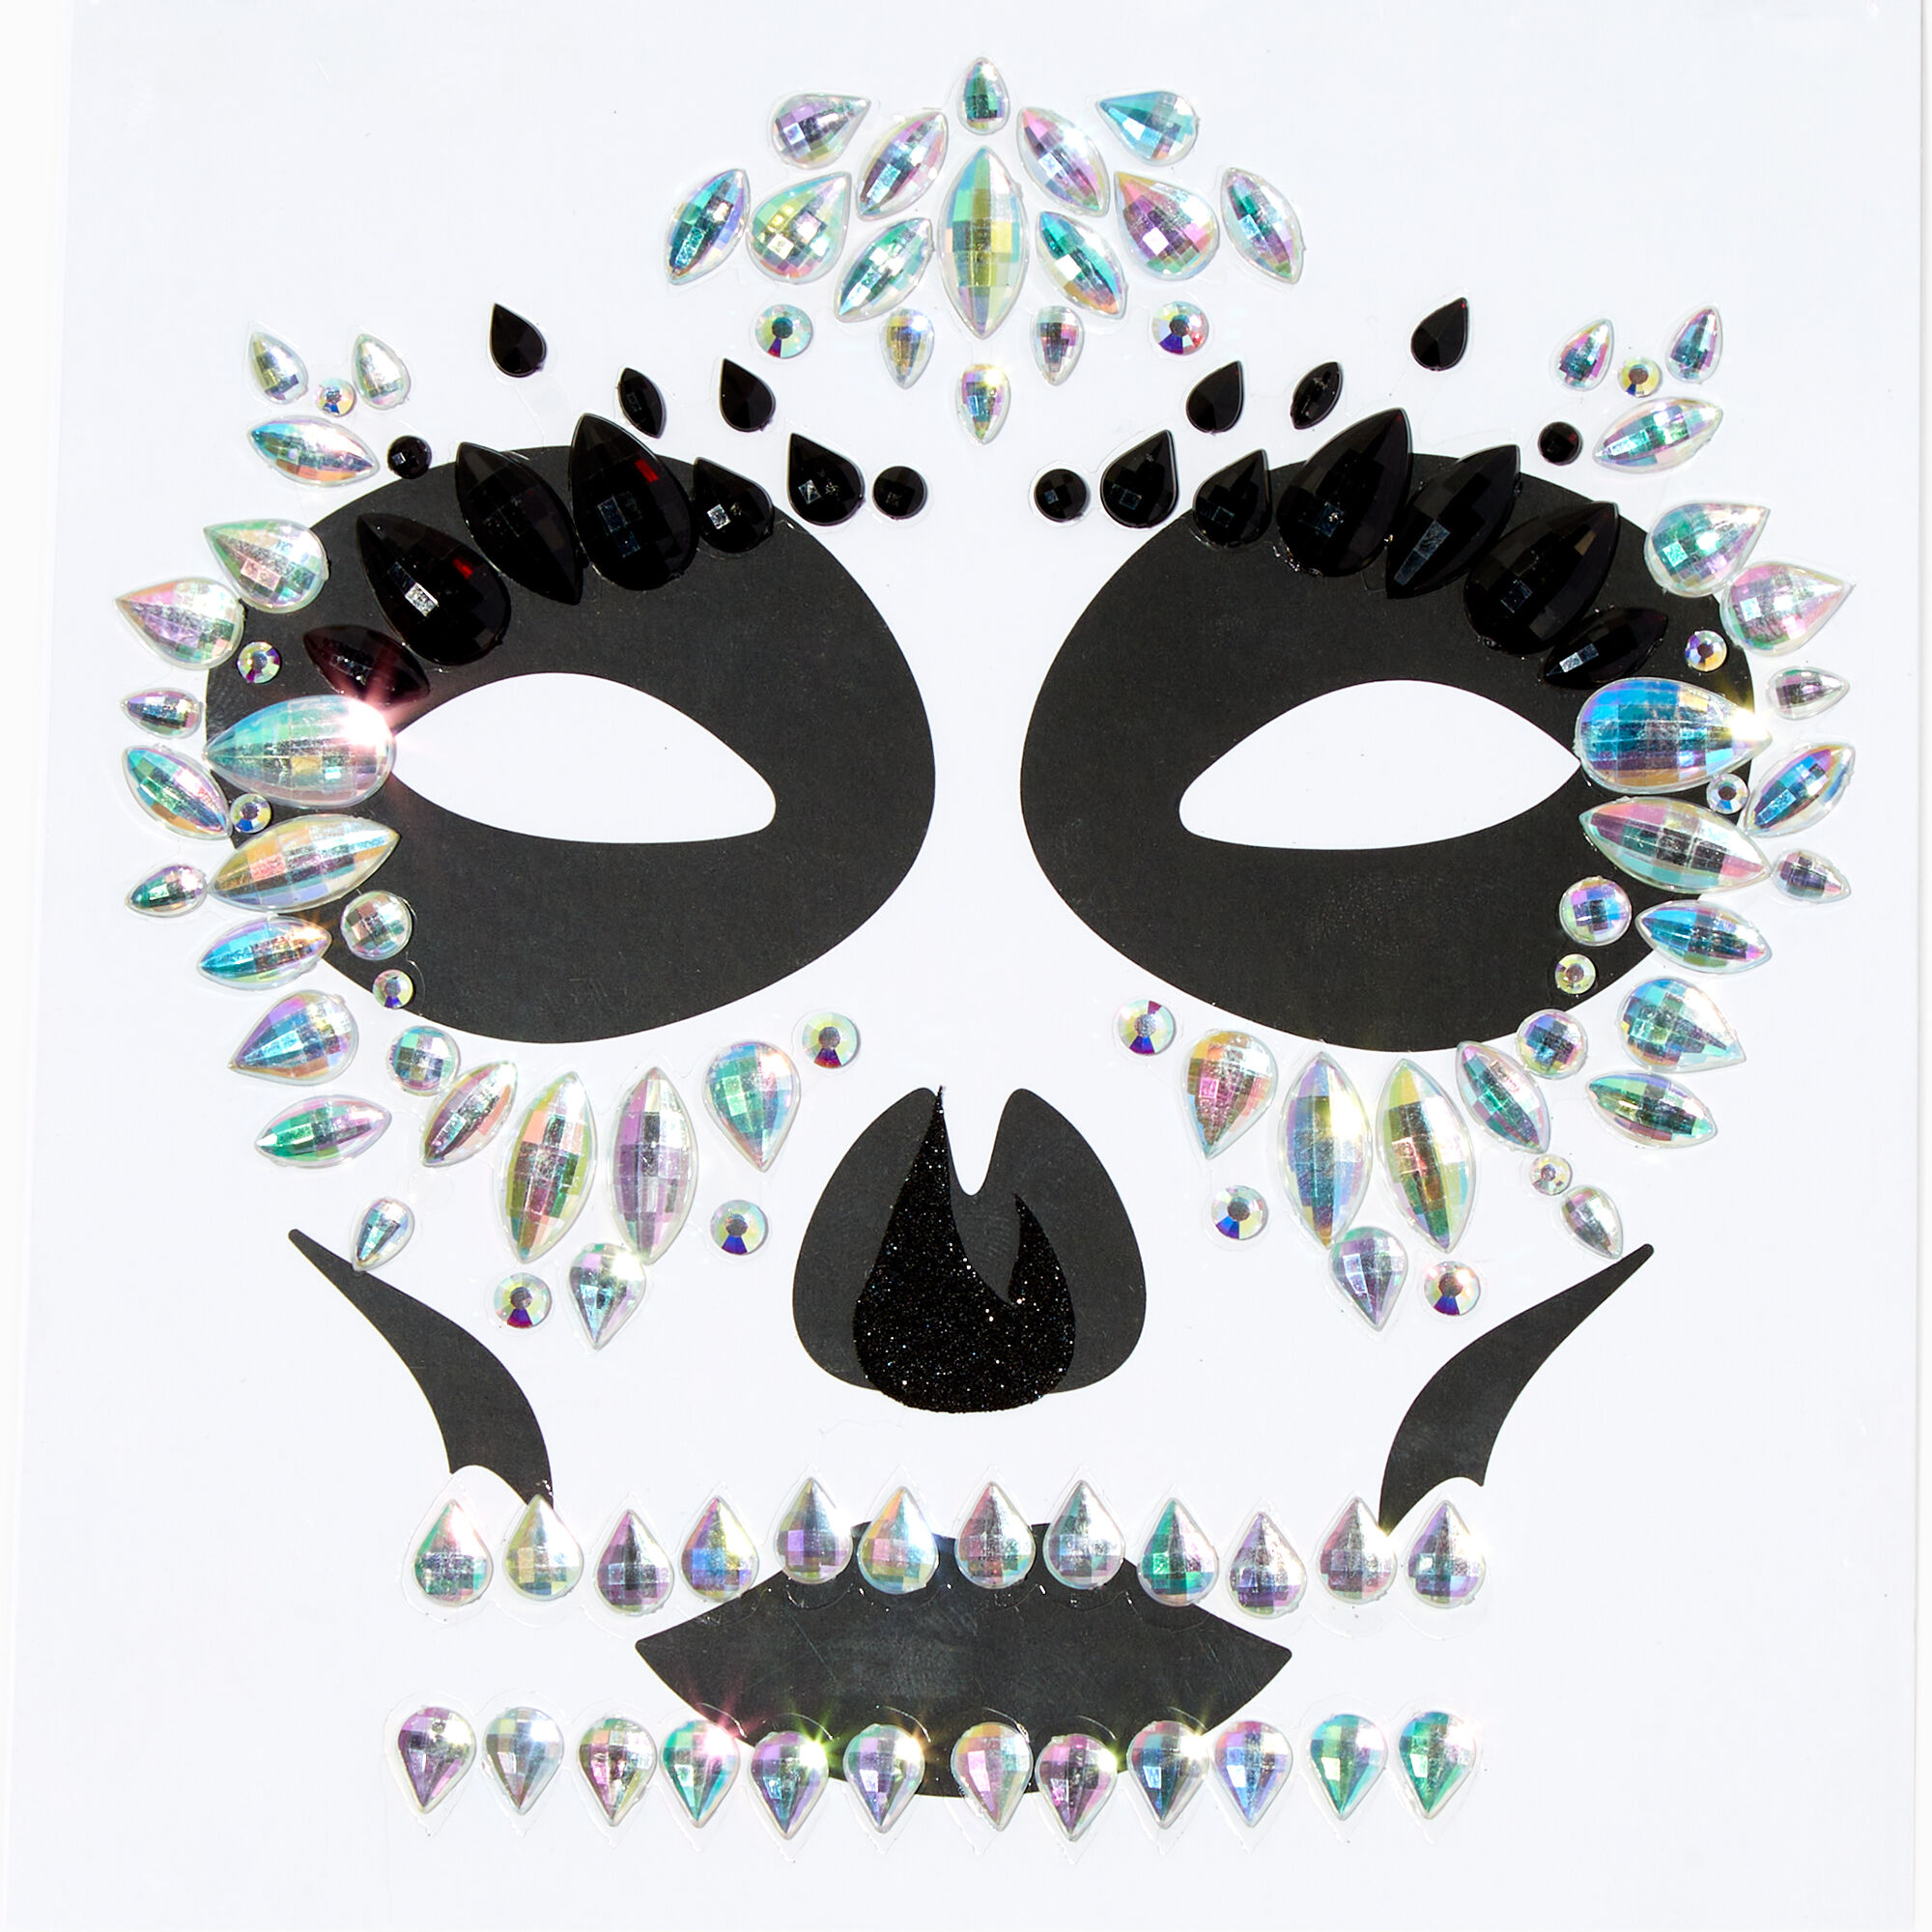 View Claires Iridescent Skeleton Face Gems information